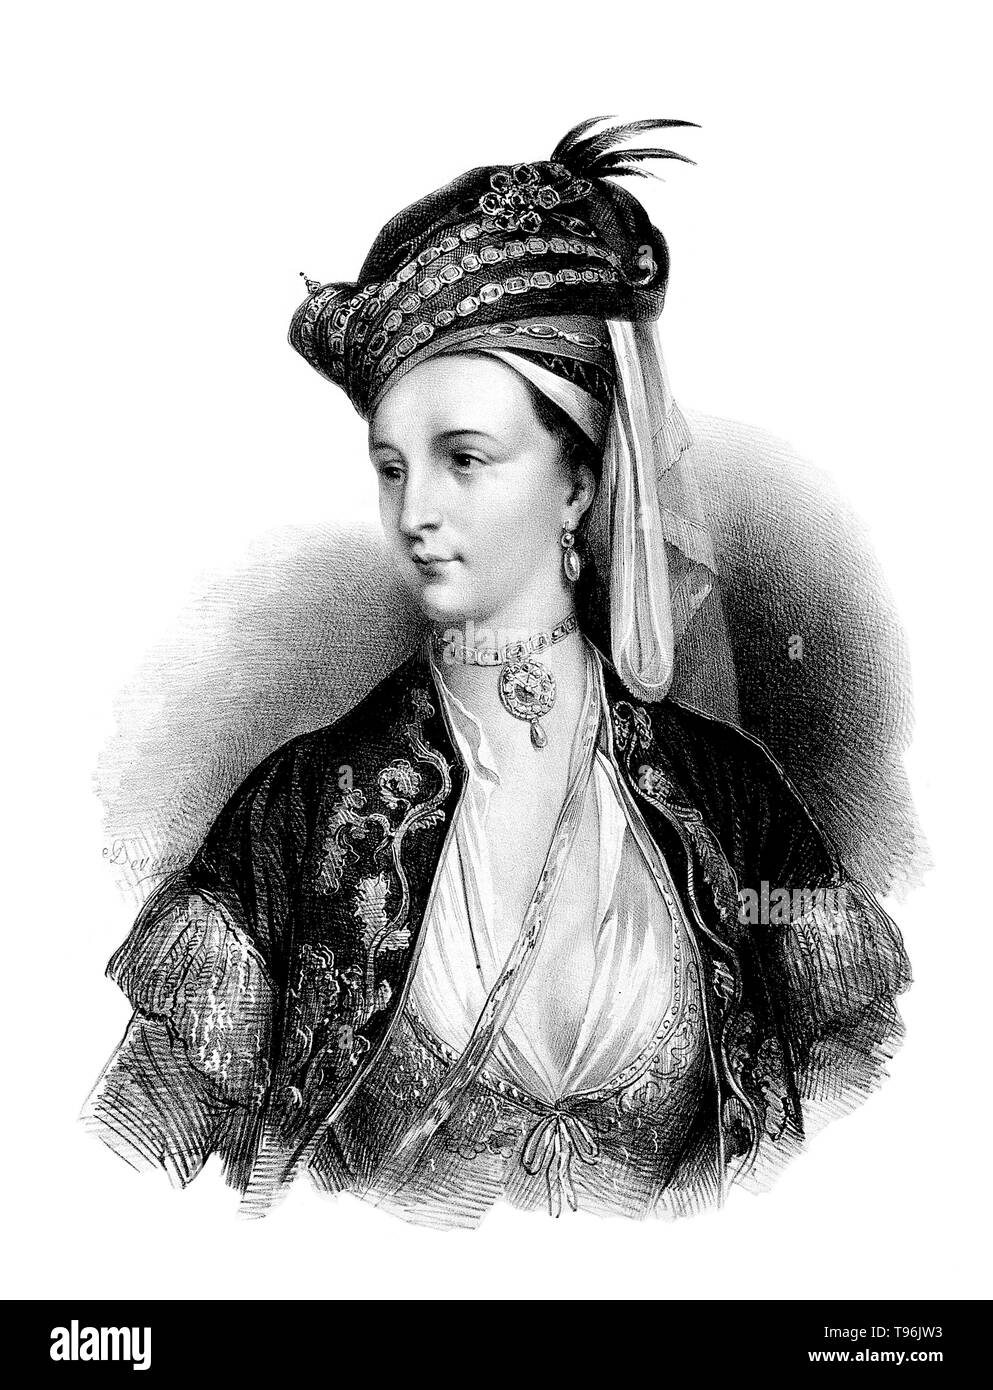 Lady Mary in Turkish dress. Lady Mary Wortley Montagu (1689 - August 21, 1762) was an English aristocrat, letter writer and poet. Lady Mary is today chiefly remembered for her travels to the Ottoman Empire, as wife to the British ambassador to Turkey. The story of this voyage and of her observations of Eastern life is told in Letters from Turkey. During her visit she was charmed by the beauty and hospitality of the Ottoman women she encountered. Stock Photo